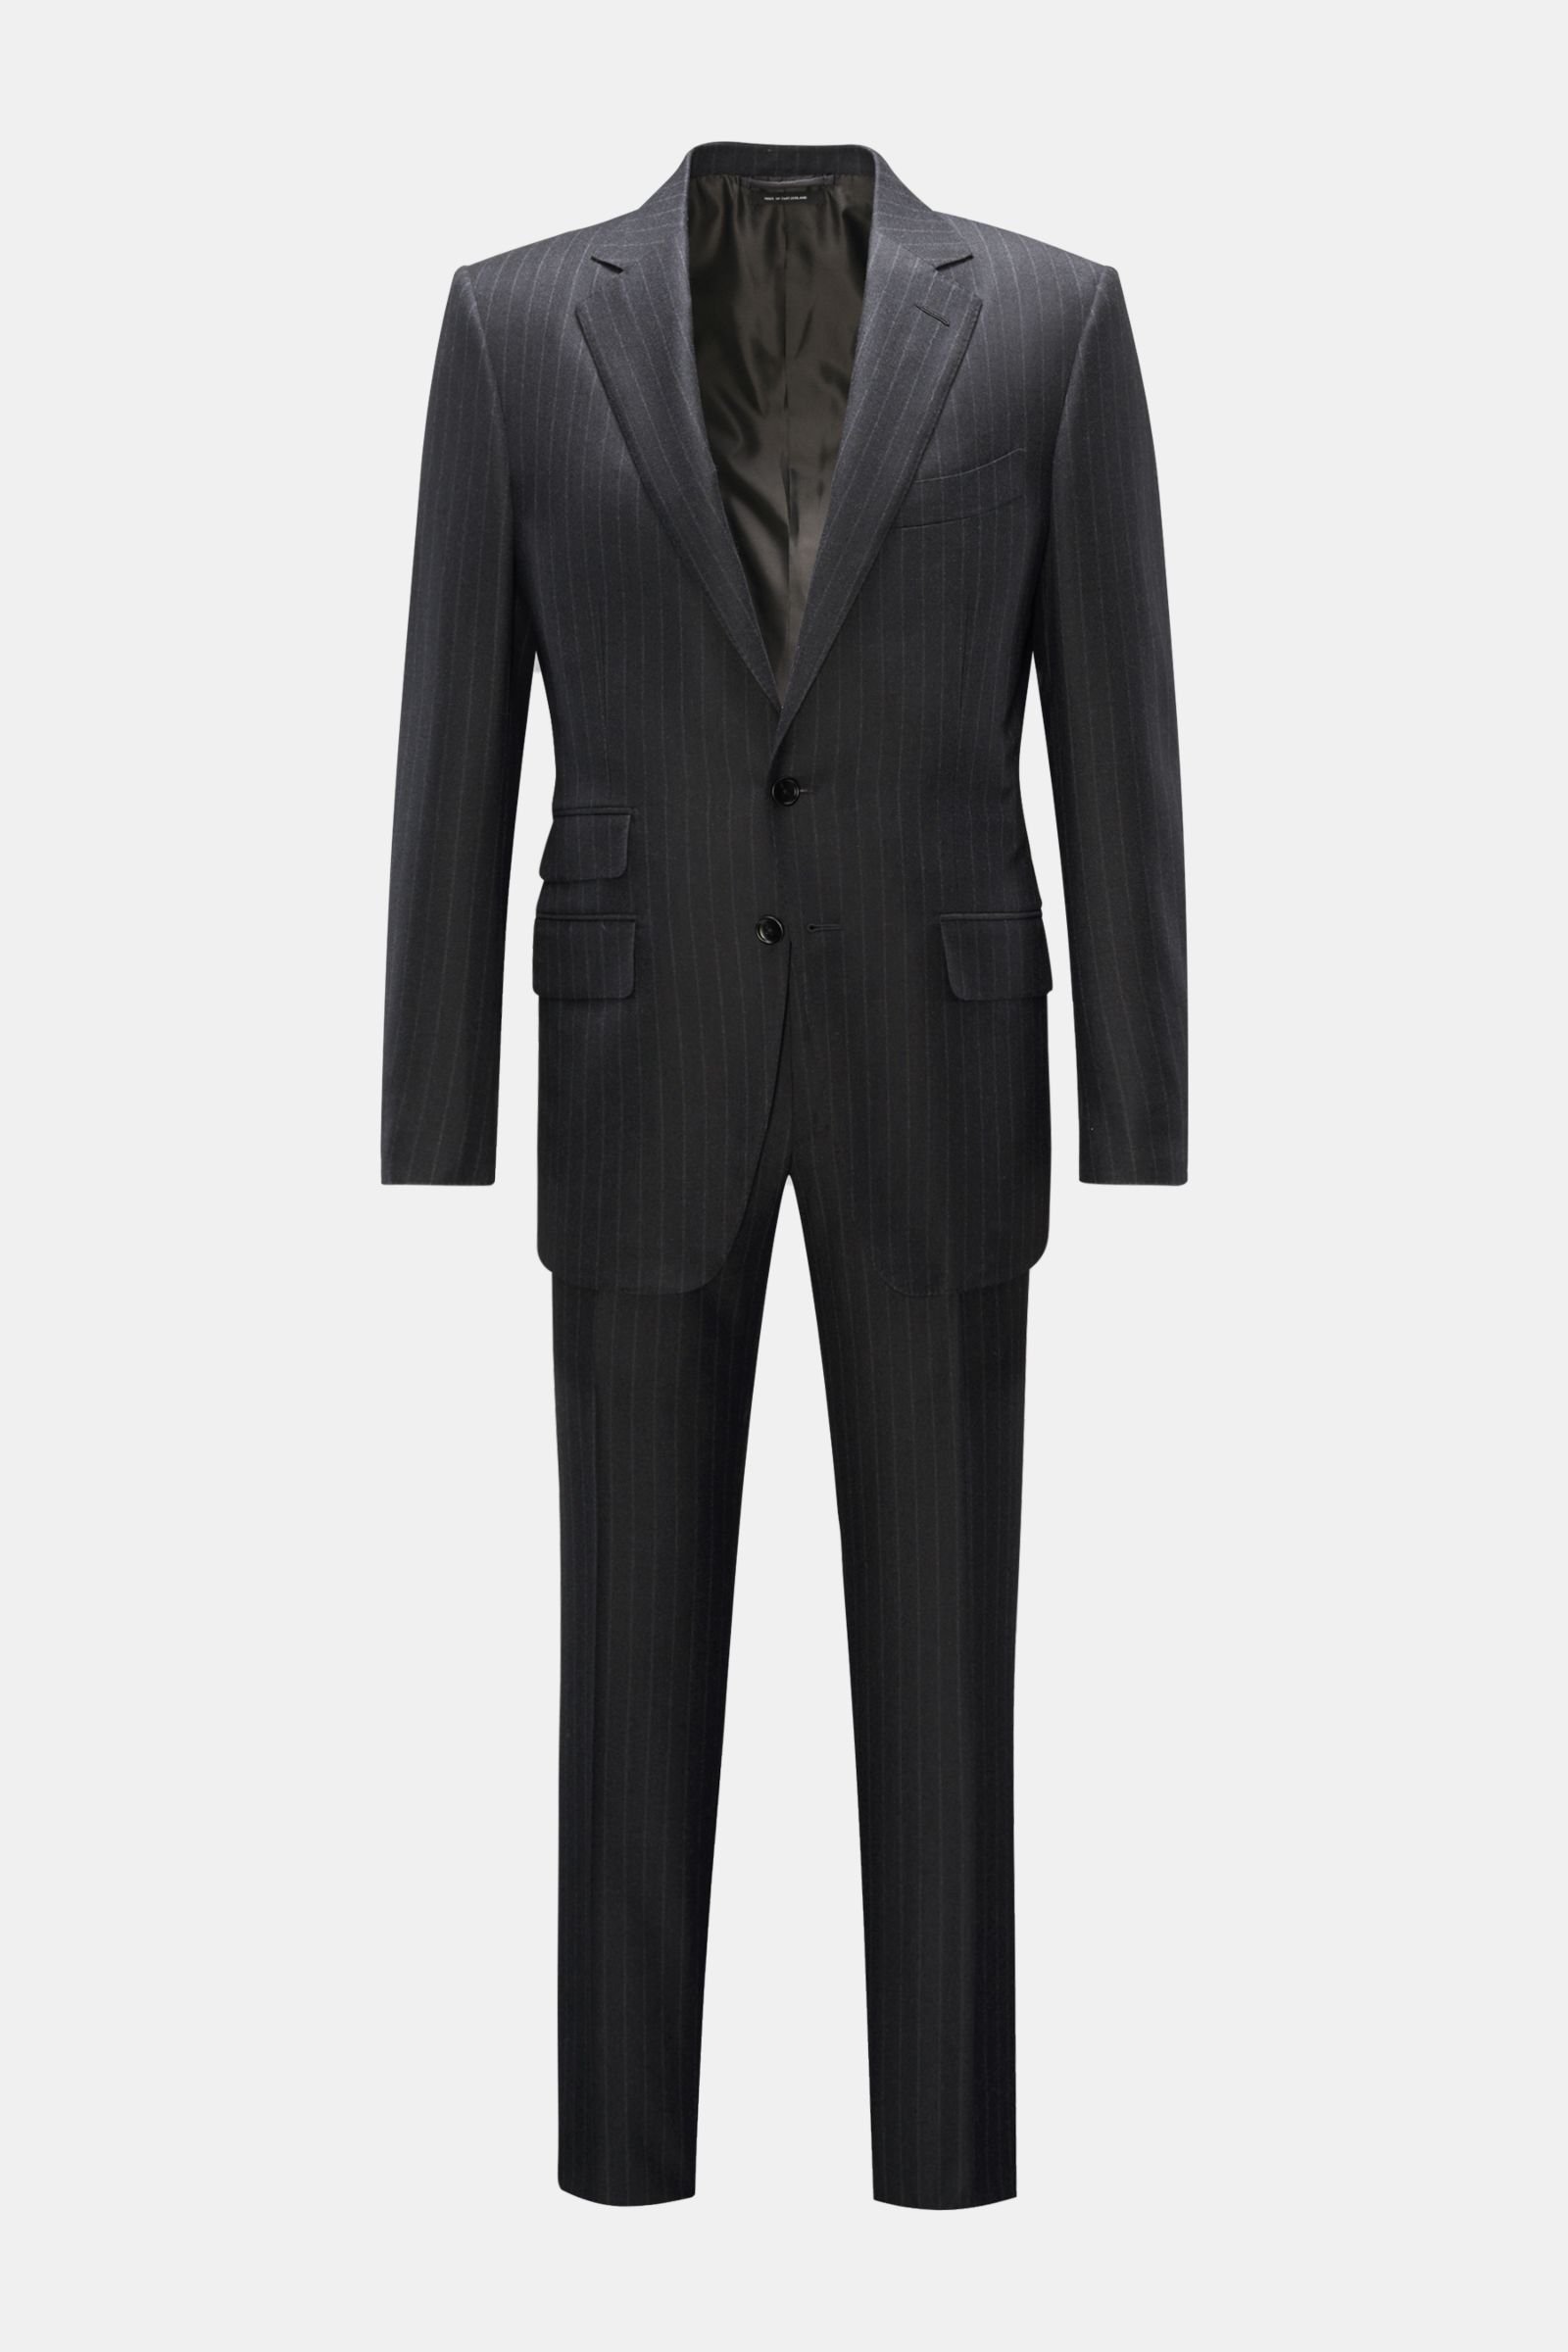 Suit 'O'Connor' anthracite/grey striped